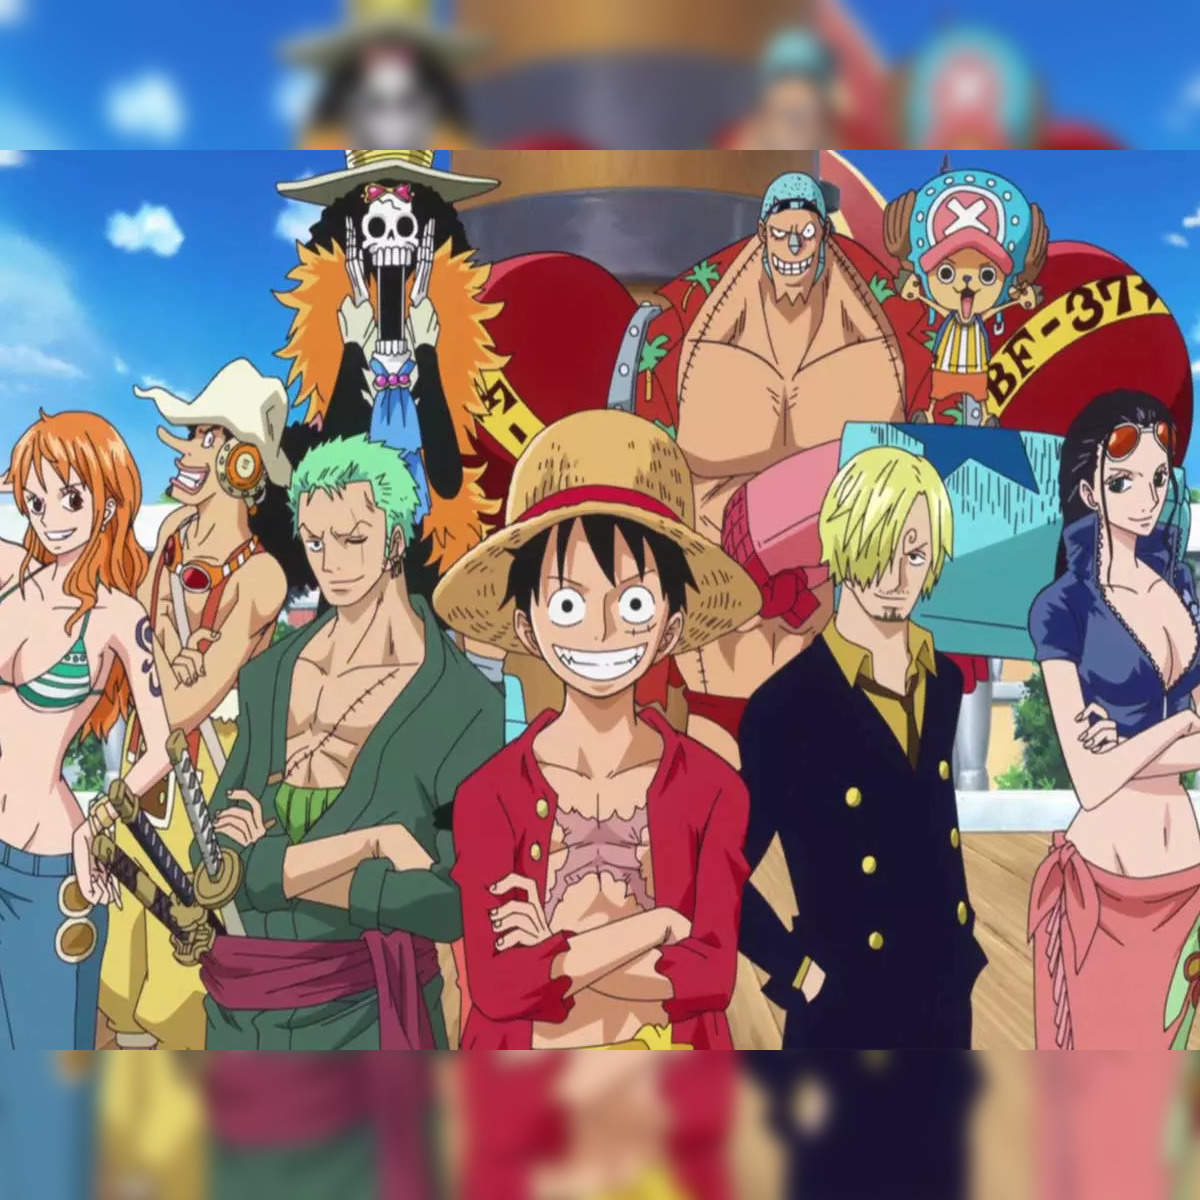 How Many Seasons of 'One Piece' Anime are on Netflix? - What's on Netflix